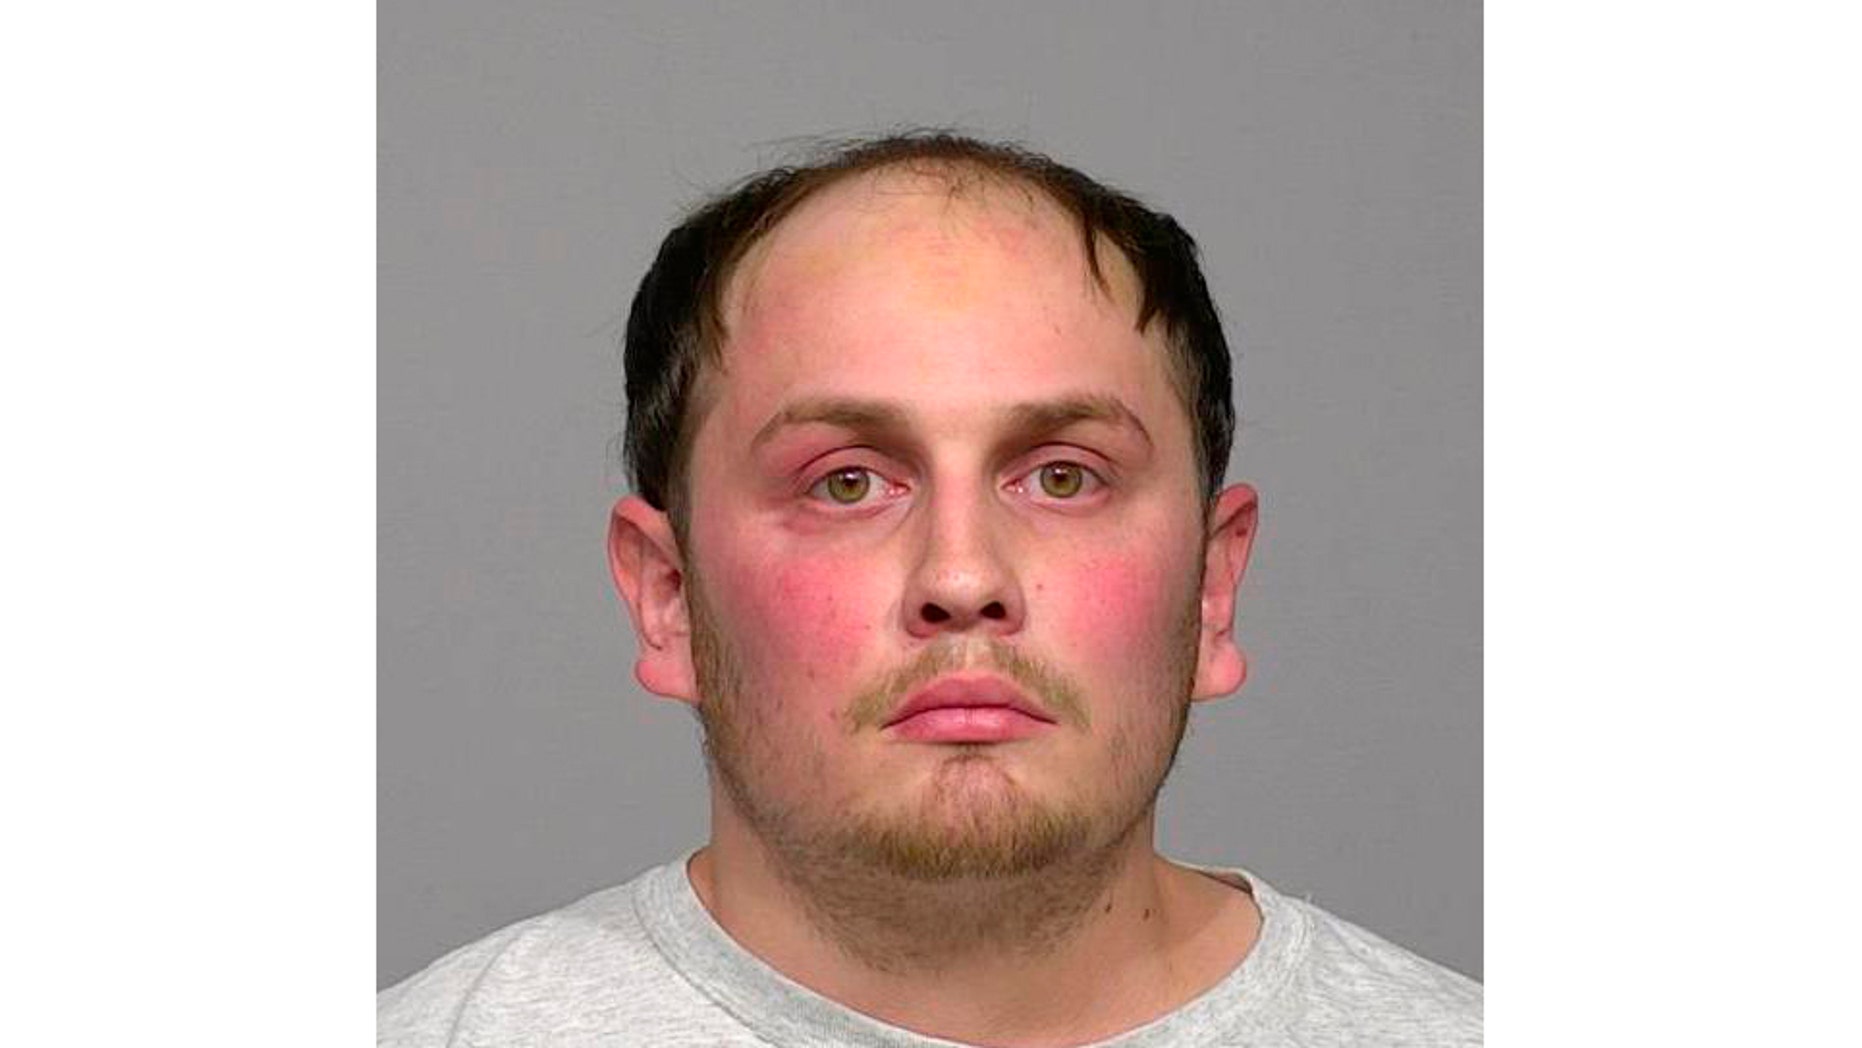   This undated image provided by Milwaukee County Jail shows Jordan Fricke. On Sunday, February 10, 2019, Fricke was charged with first degree intentional homicide and other crimes as part of the fatal shooting on Wednesday of Agent Matthew Rittner, who was serving a search warrant. (Milwaukee County Prison via AP) 